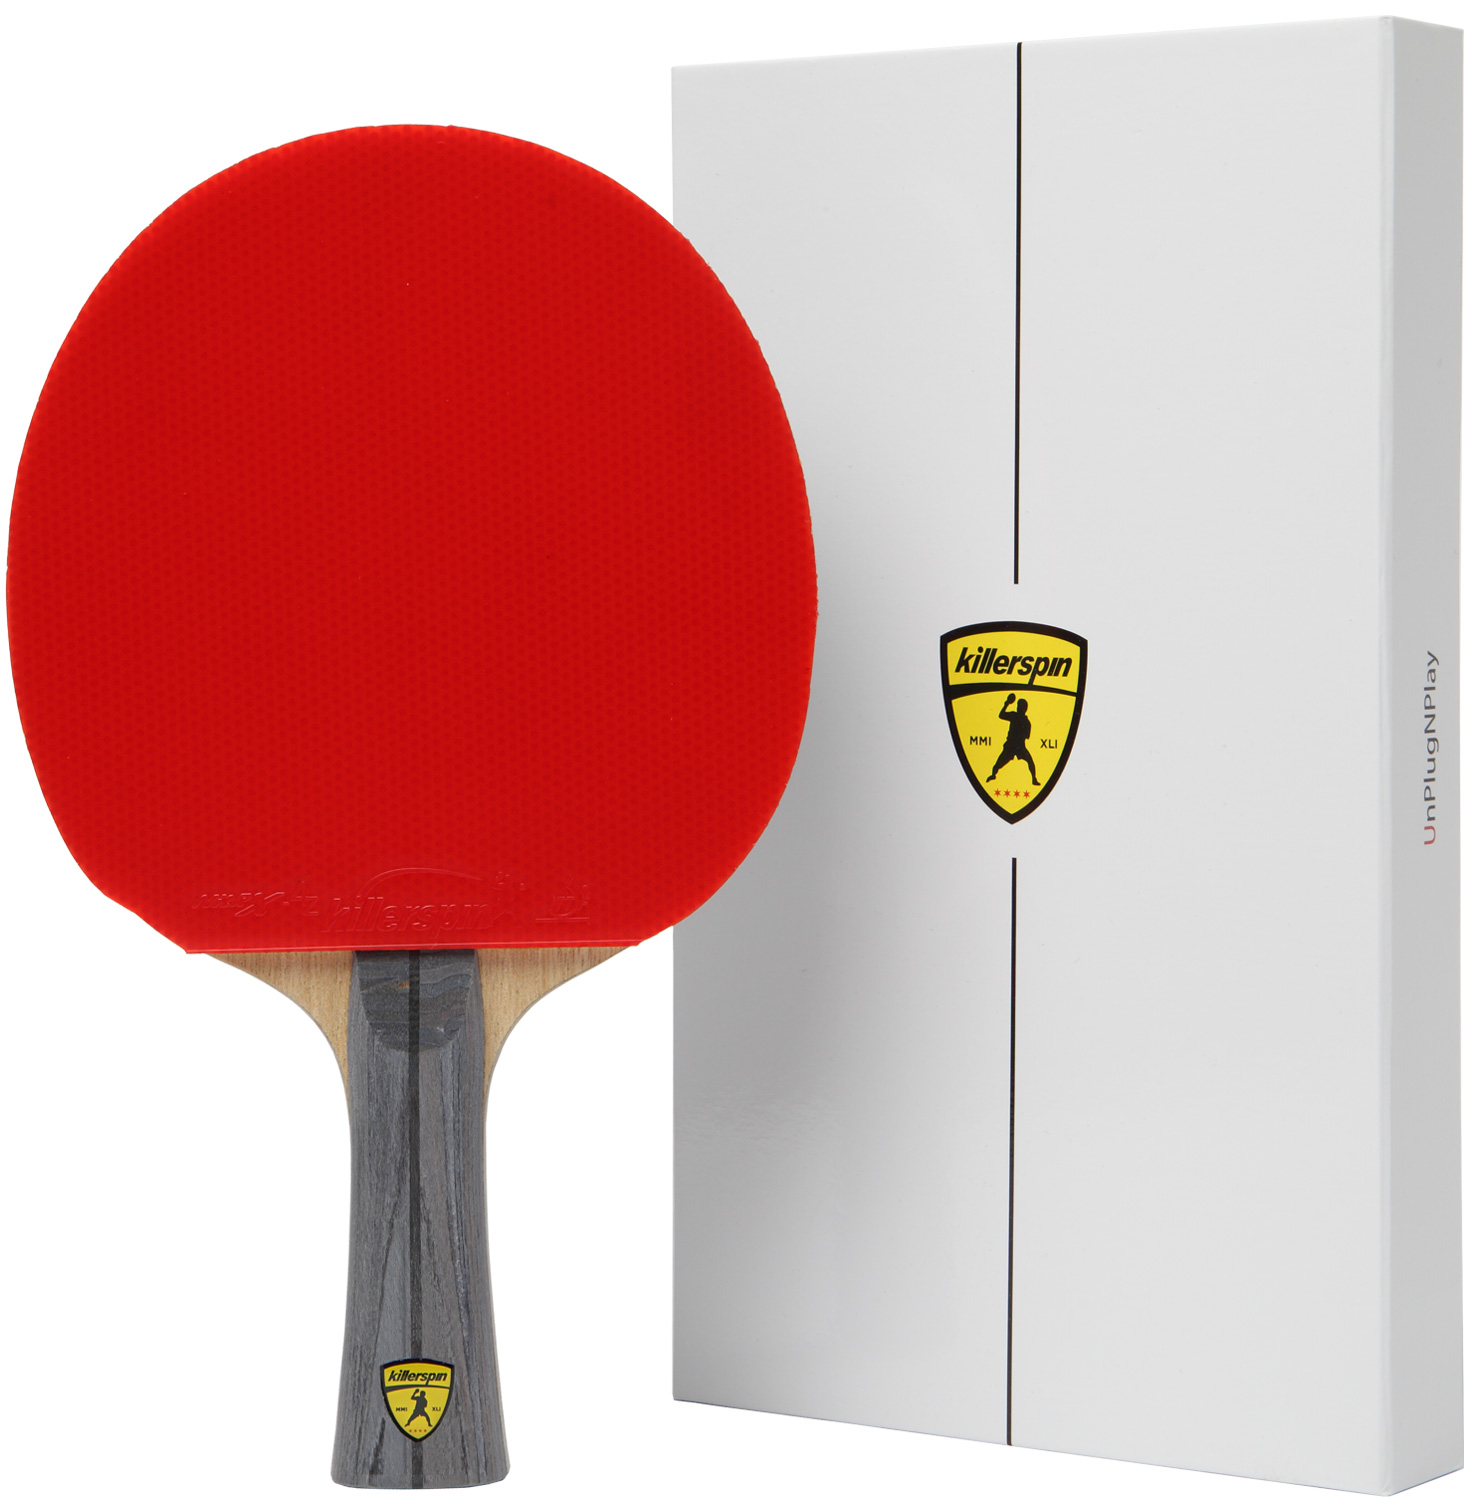 Killerspin JET600 SPIN N1 Intermediate Table Tennis Paddle, Red - image 1 of 4